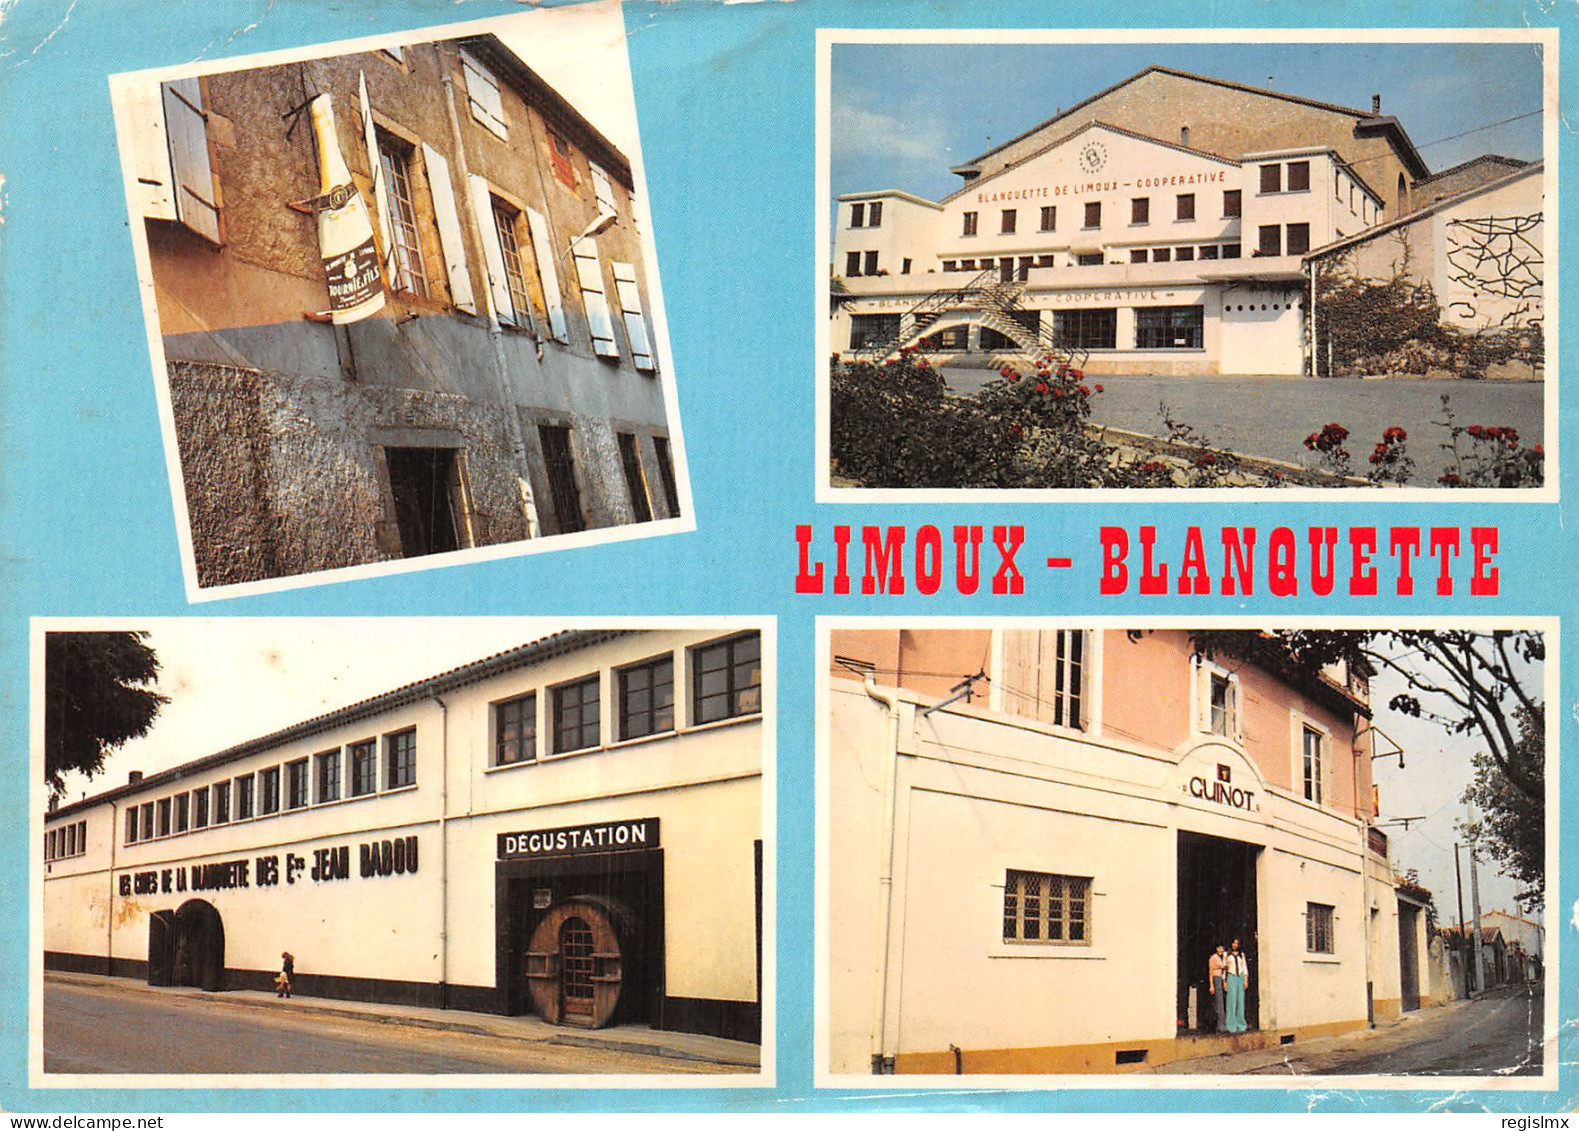 11-LIMOUX BLANQUETTE-N°T2182-D/0037 - Limoux